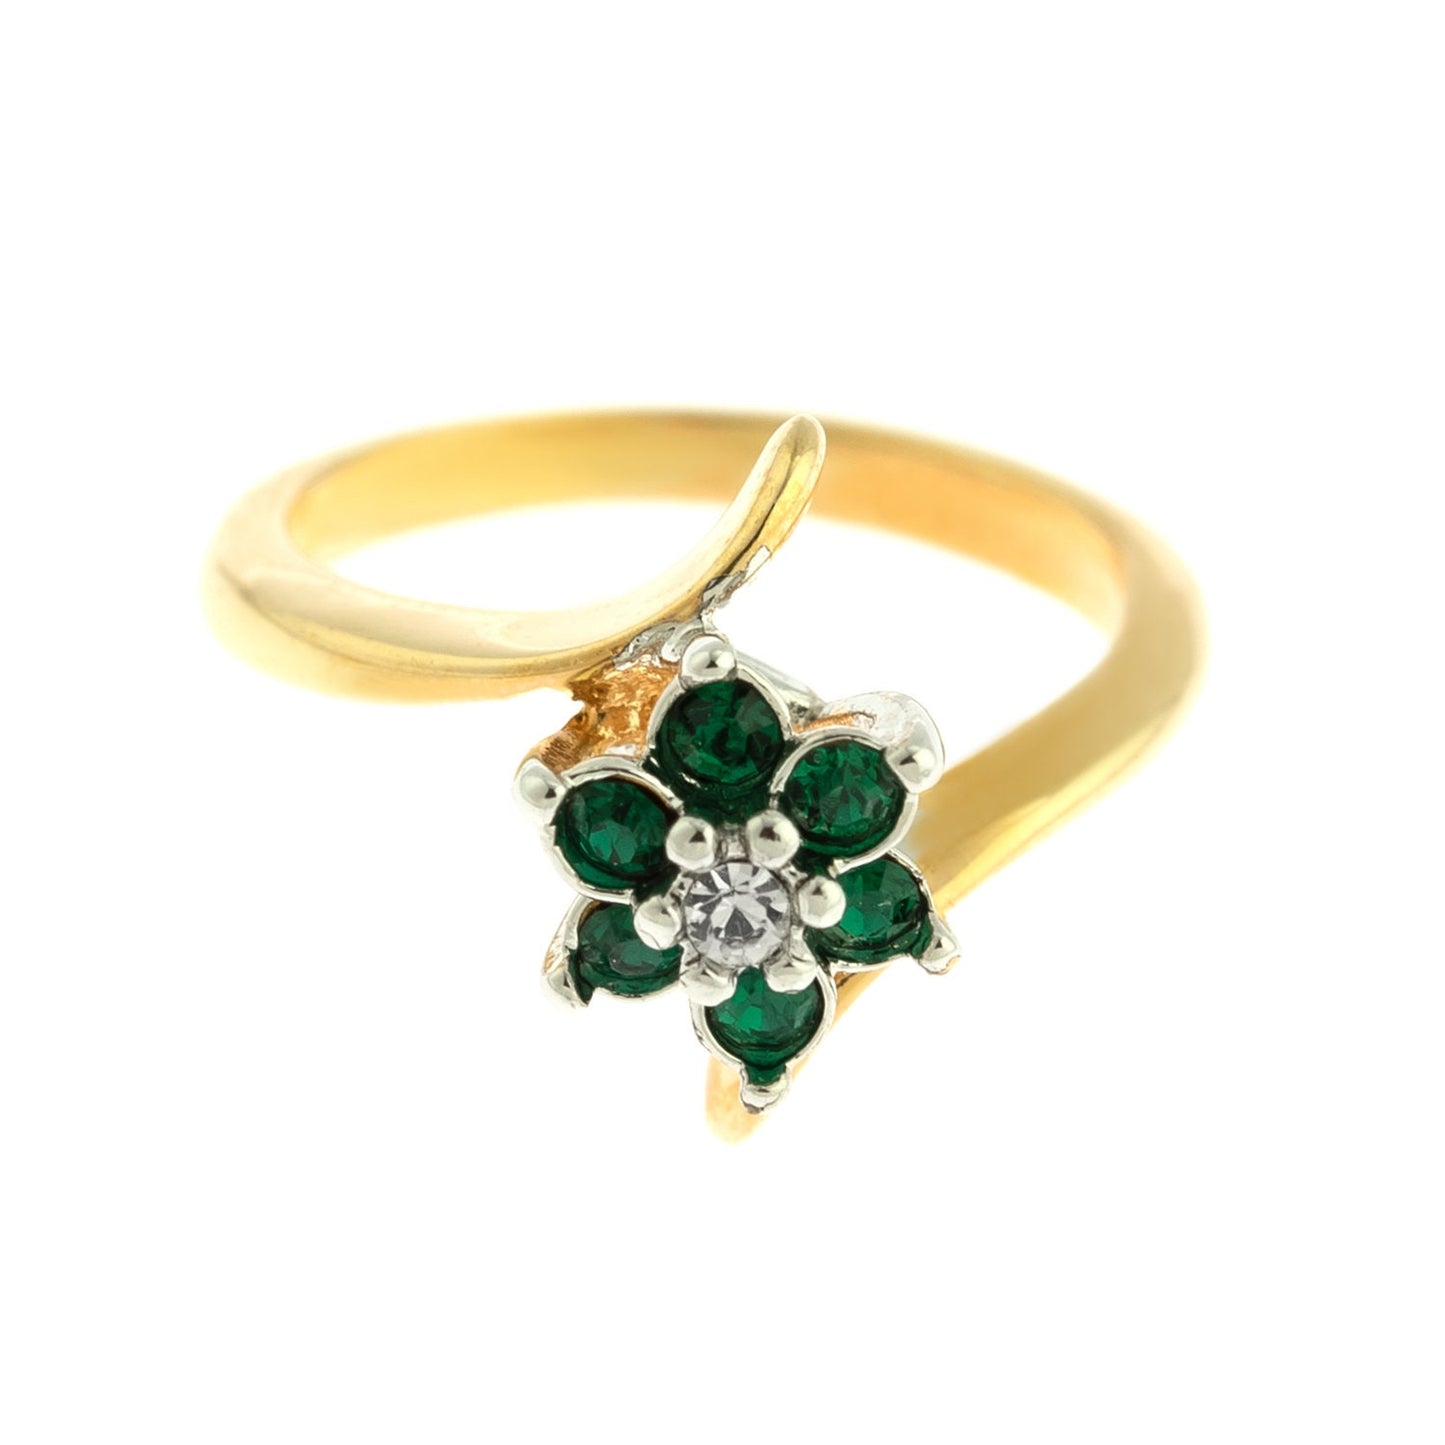 A Vintage Ring 1970's Emerald and Swarovski Crystal Ring 18kt Gold Flower Ring Jewelry Handmade for Women R842 - Limited Stock - Never Worn